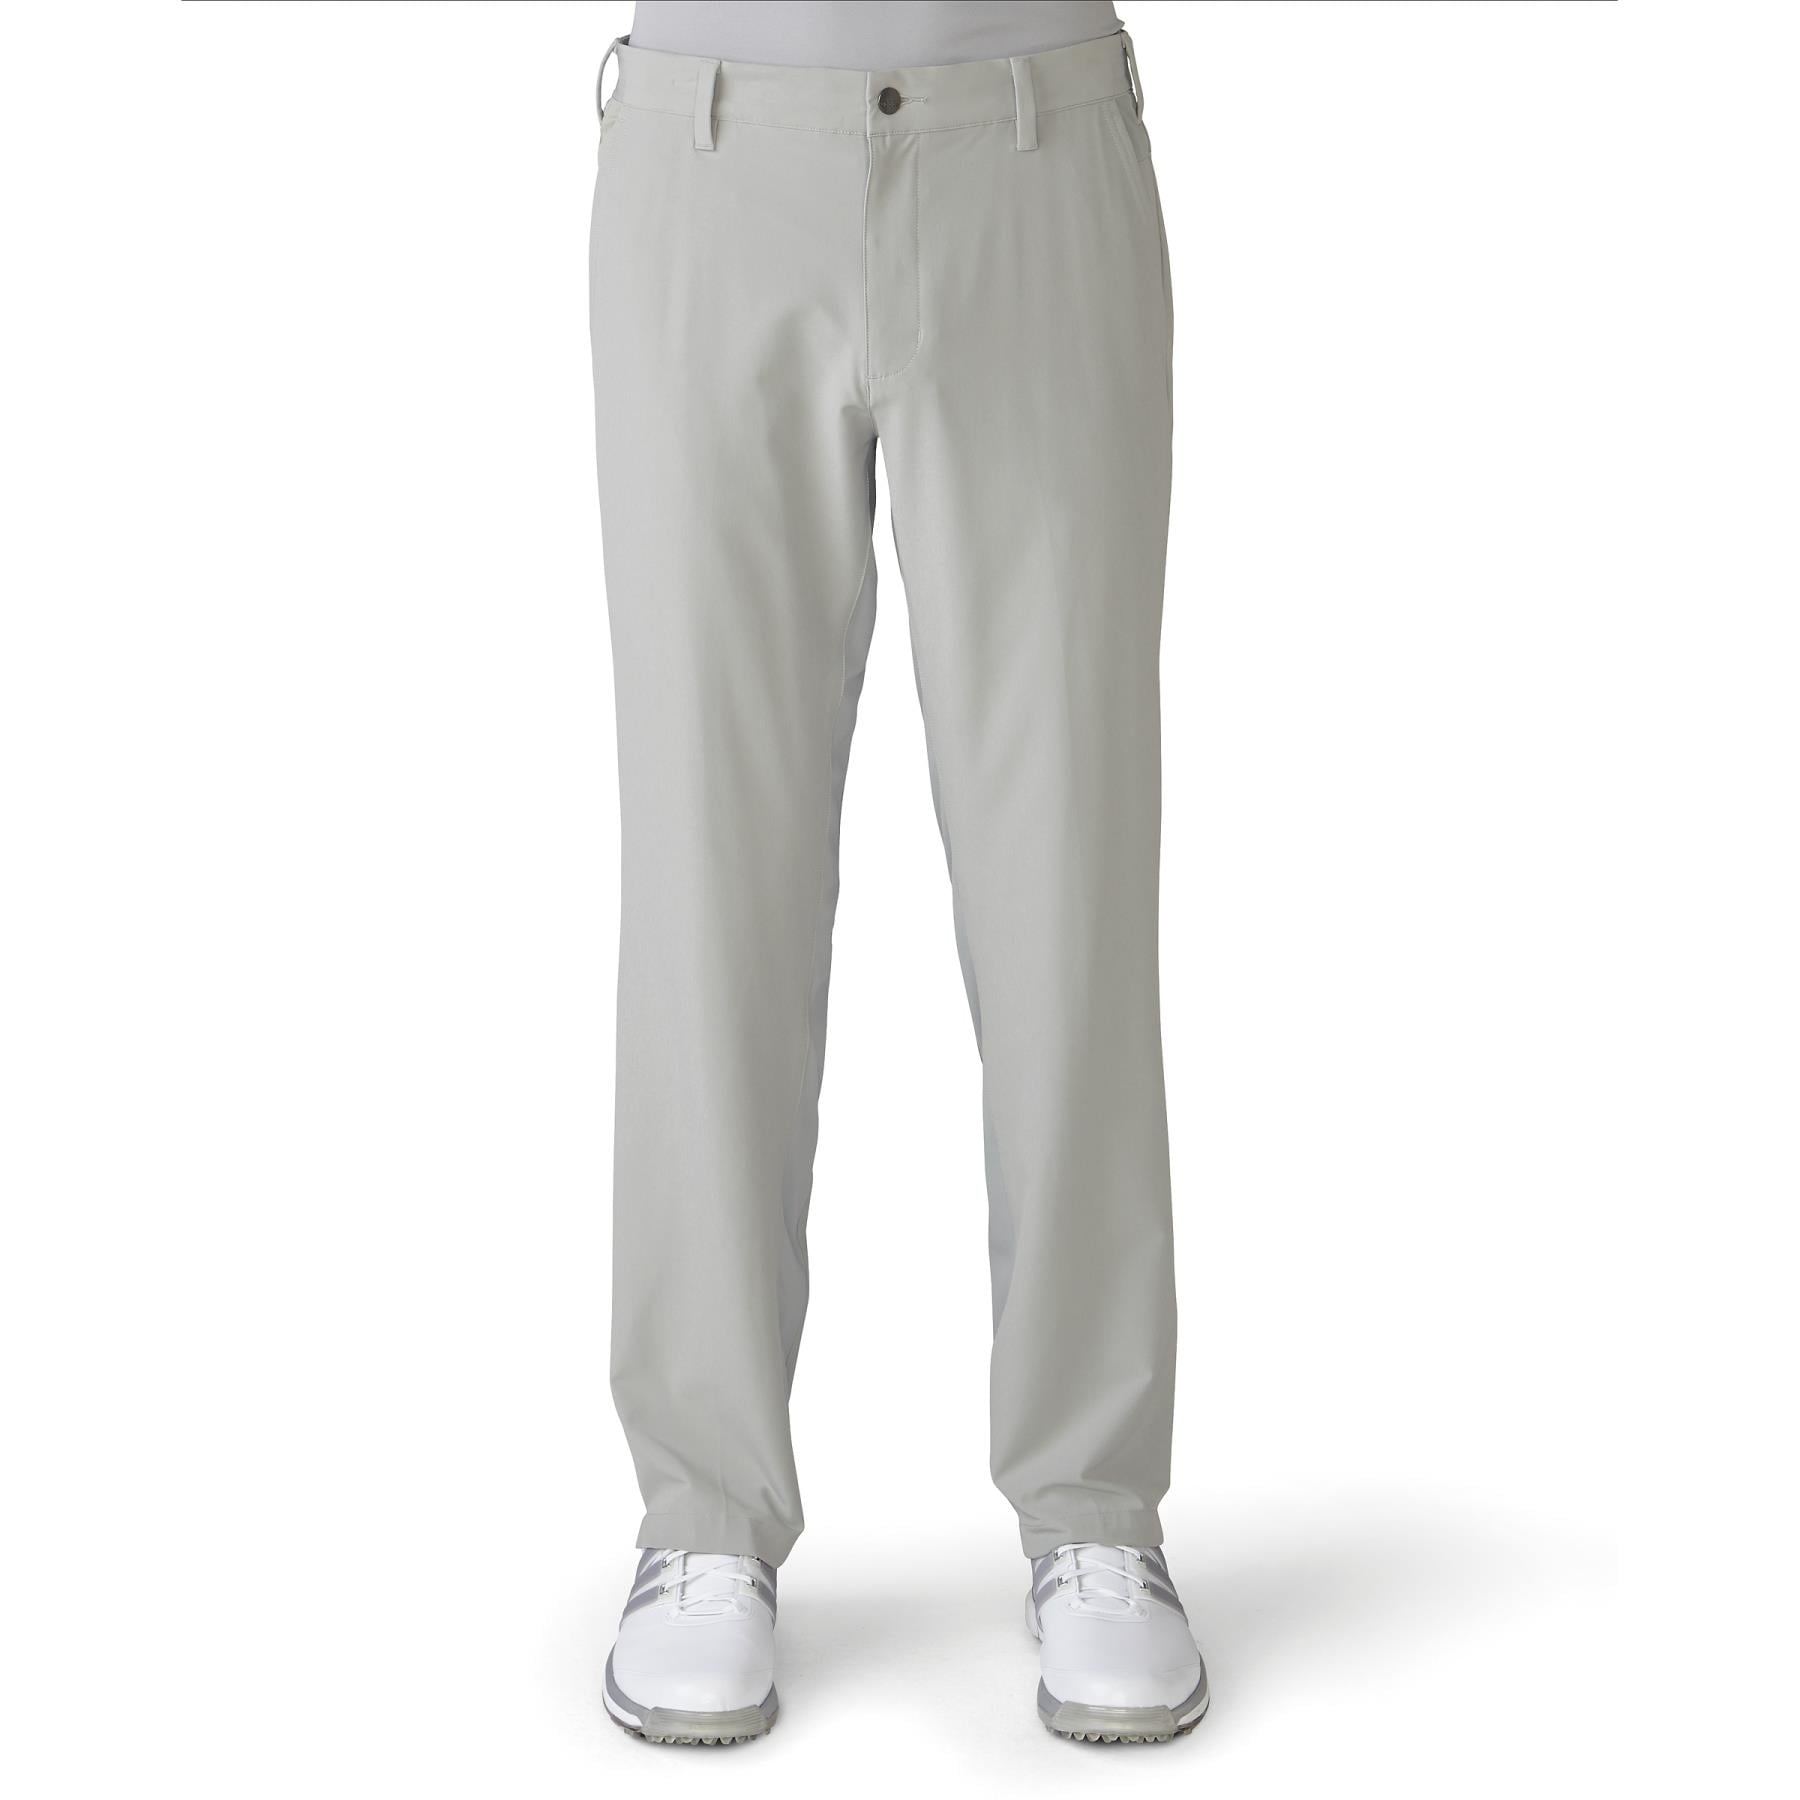 2016 Adidas Climacool Ultimate Airflow Pants Mens Performance Golf